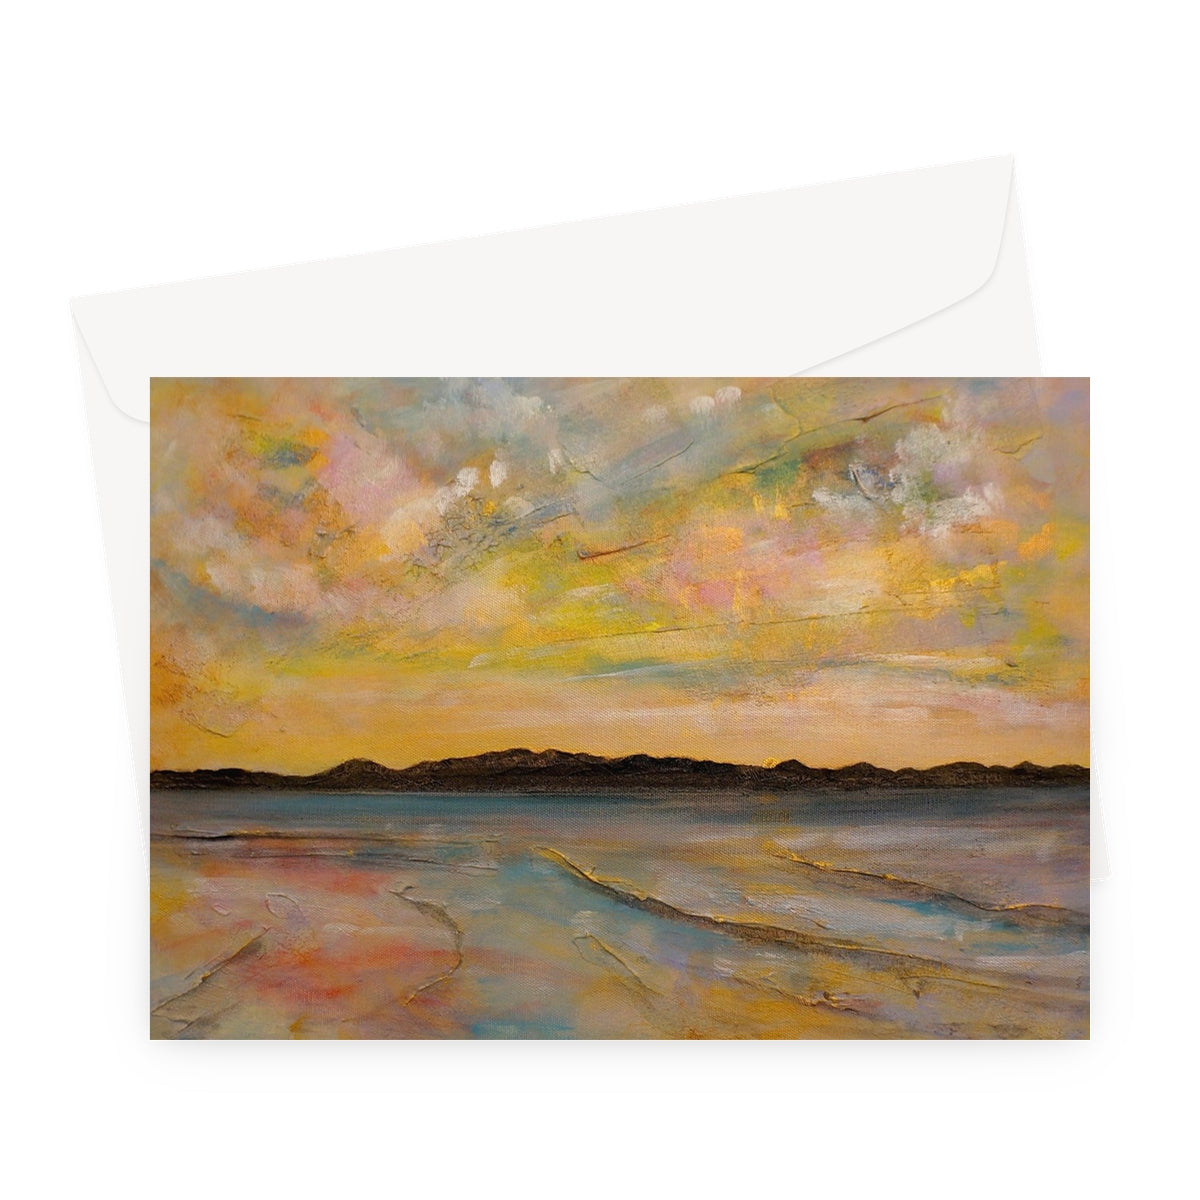 Vallay Island North Uist Art Gifts Greeting Card-Greetings Cards-Hebridean Islands Art Gallery-A5 Landscape-1 Card-Paintings, Prints, Homeware, Art Gifts From Scotland By Scottish Artist Kevin Hunter